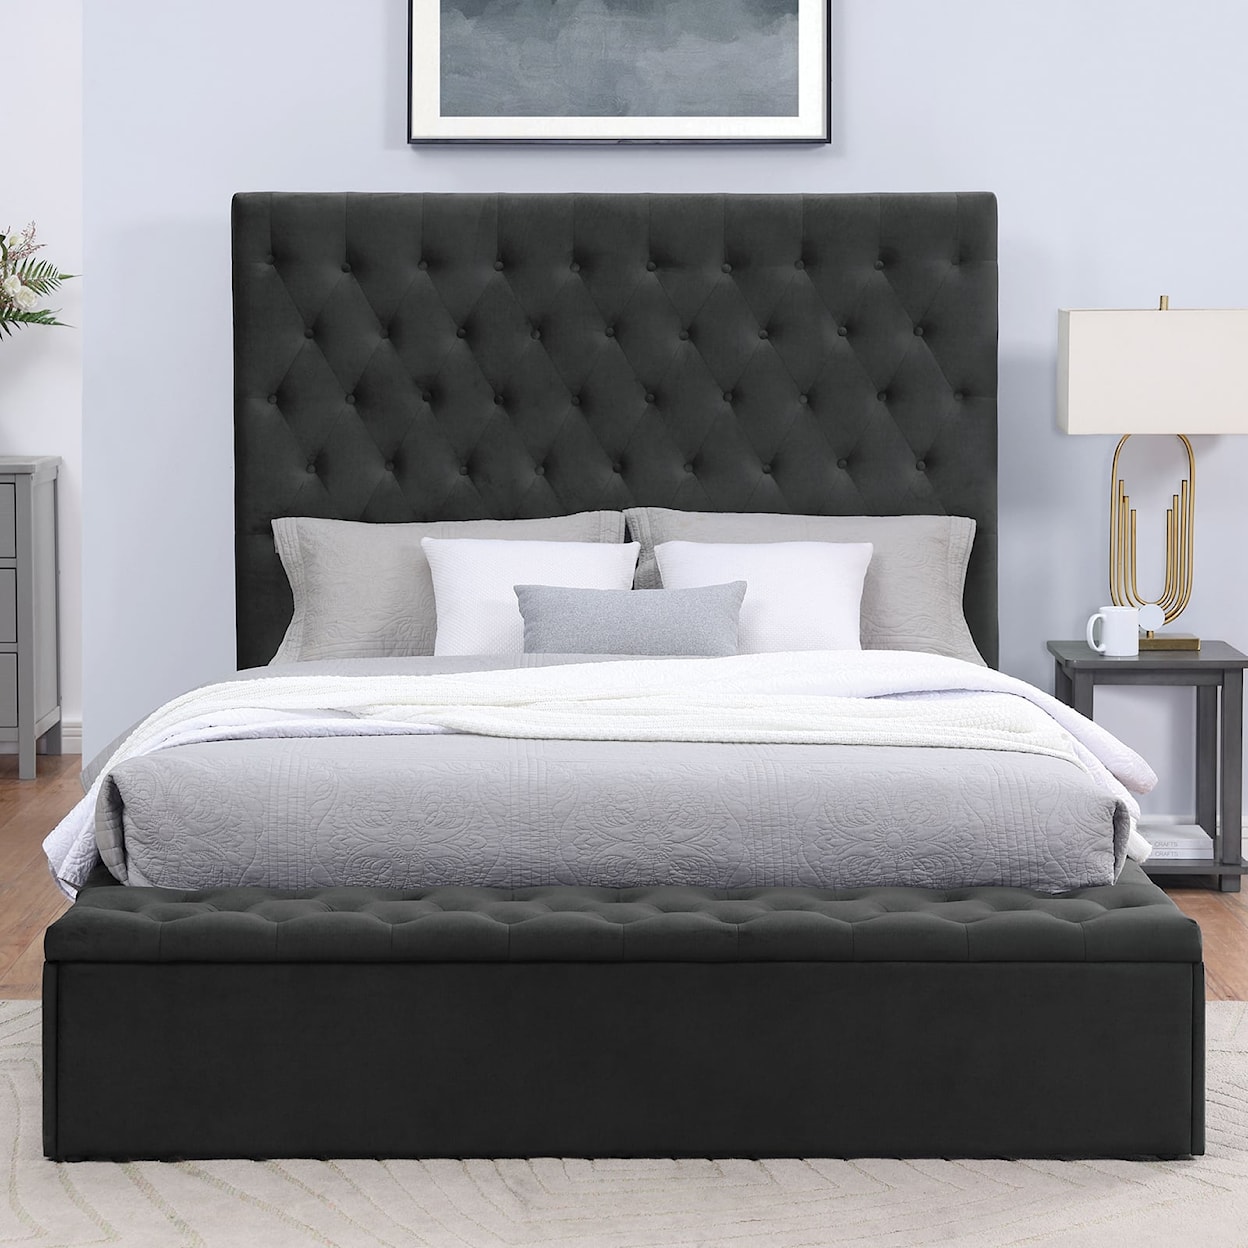 Furniture of America Athenelle Queen Bed with Button Tufted Headboard